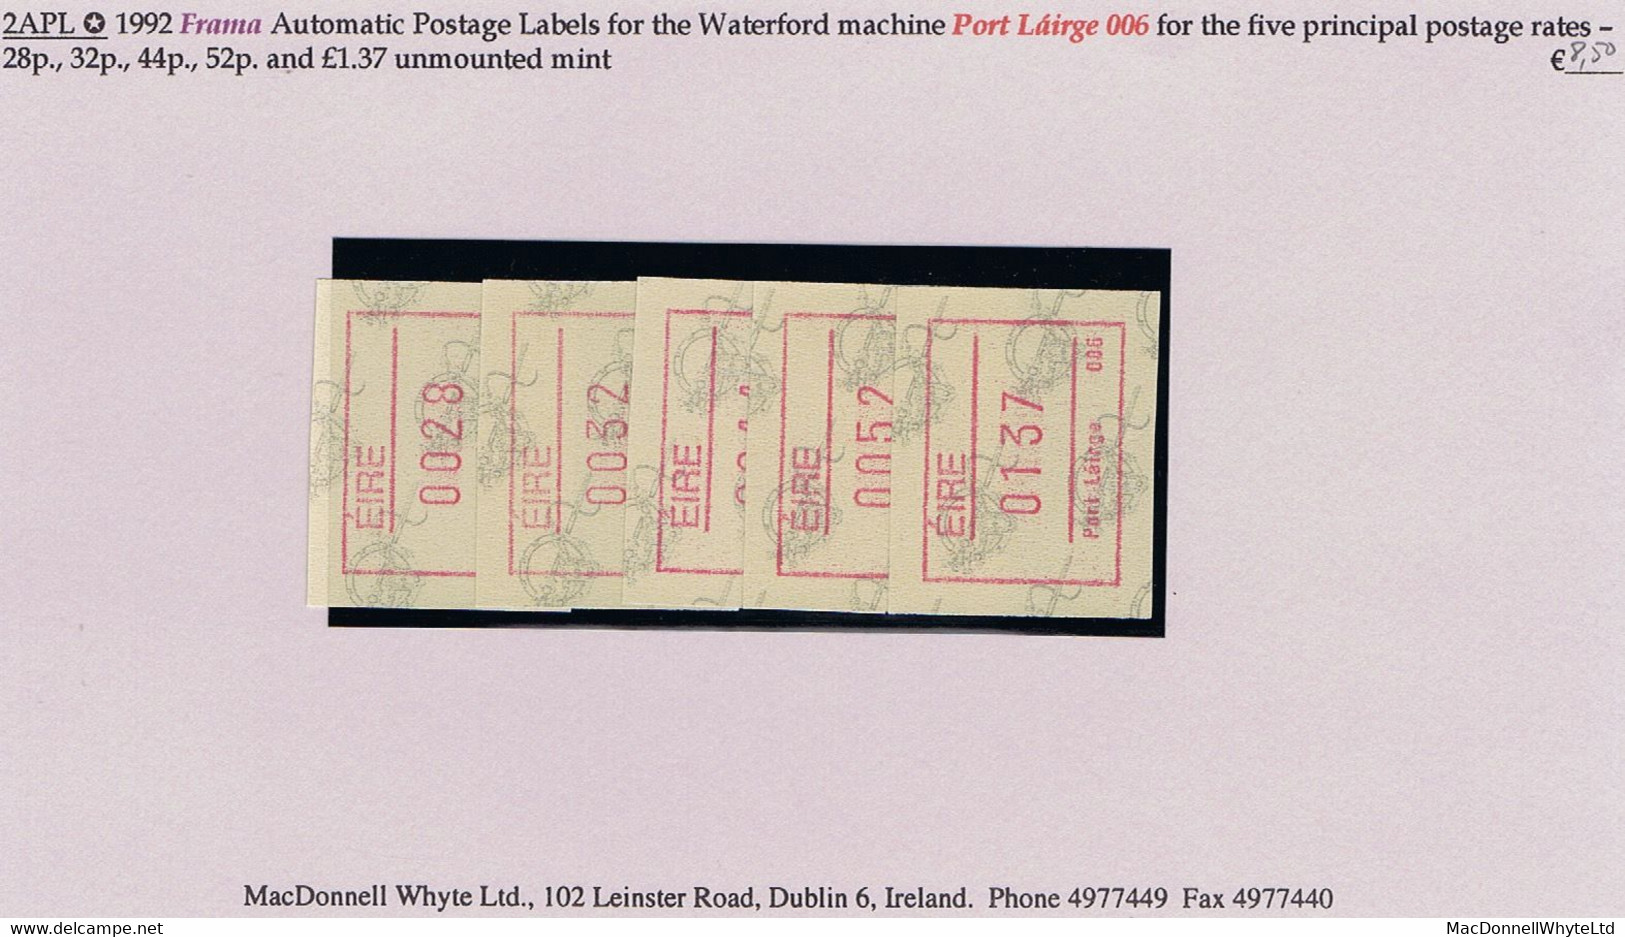 Ireland 1992 Frama Automatic Postage Labels For Waterford 006 Machine For Five Rates 28p, 32p, 44p, 52p, £1.37 Mint - Affrancature Meccaniche/Frama